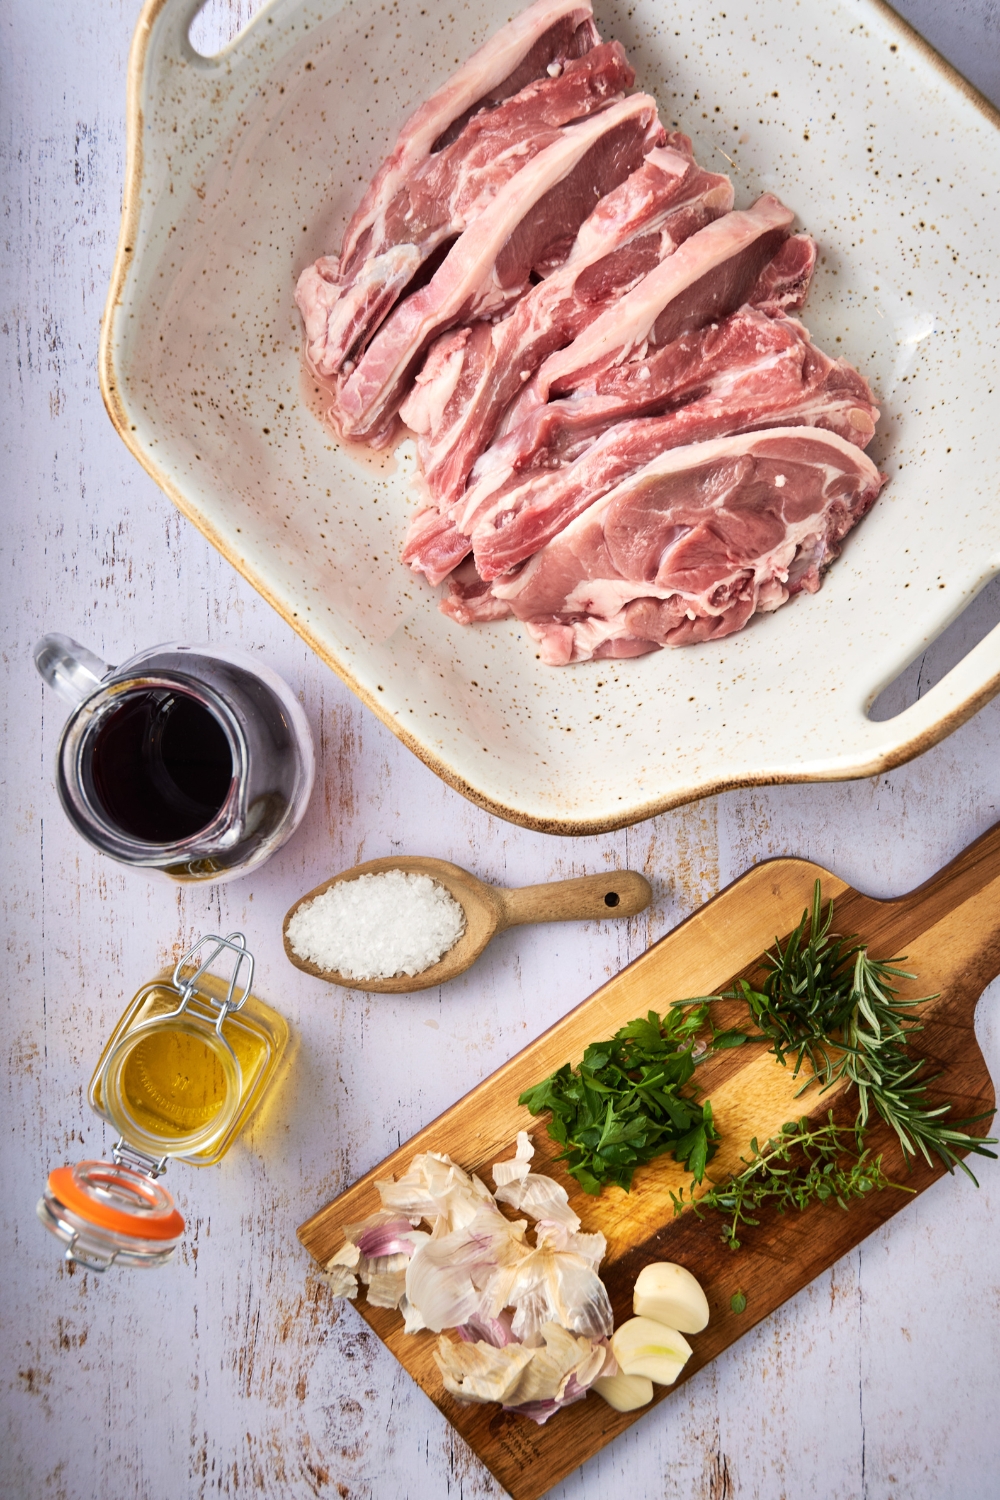 A wooden cutting board holds fresh herbs, sliced shallots, and garlic cloves. A white dish holds raw lamb shoulder chops and oils and salts are in separate containers on a white countertop.